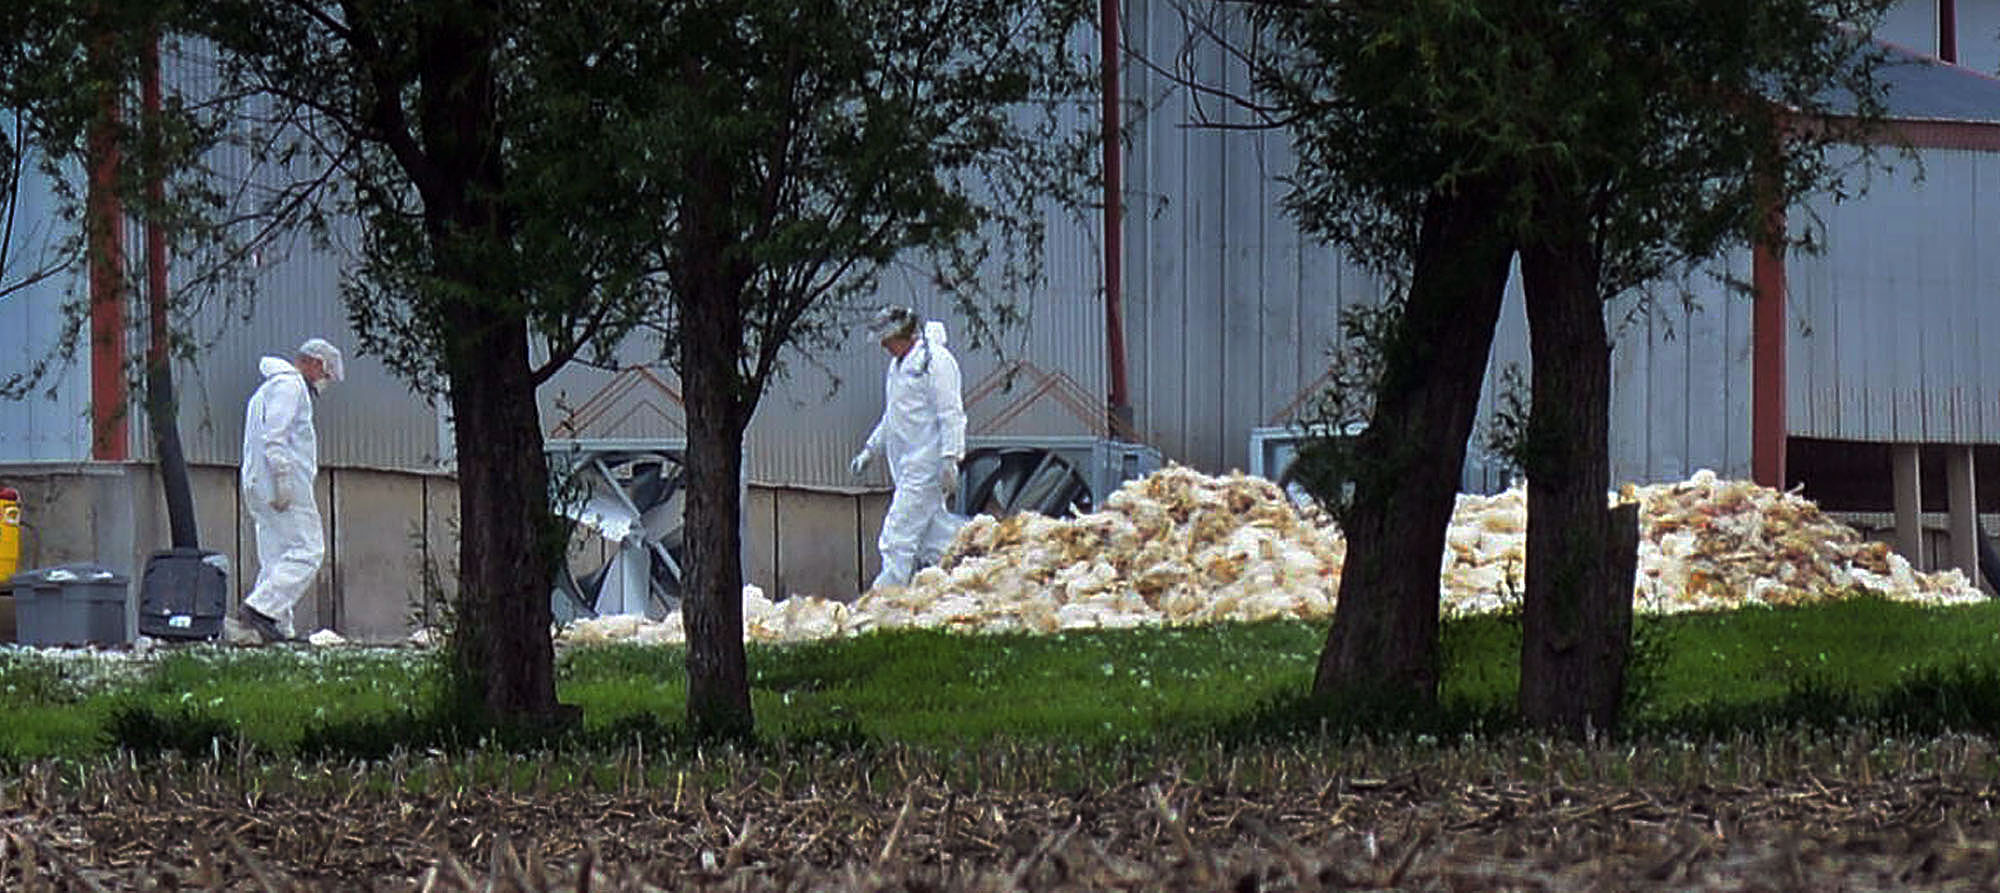 In this May 11, 2015 photo provided by John Gaps III, men in hazardous materials suits load dead poultry to be buried at Rose Acre Farms, Inc., just west of Winterset, Iowa. (John Gaps III—AP)